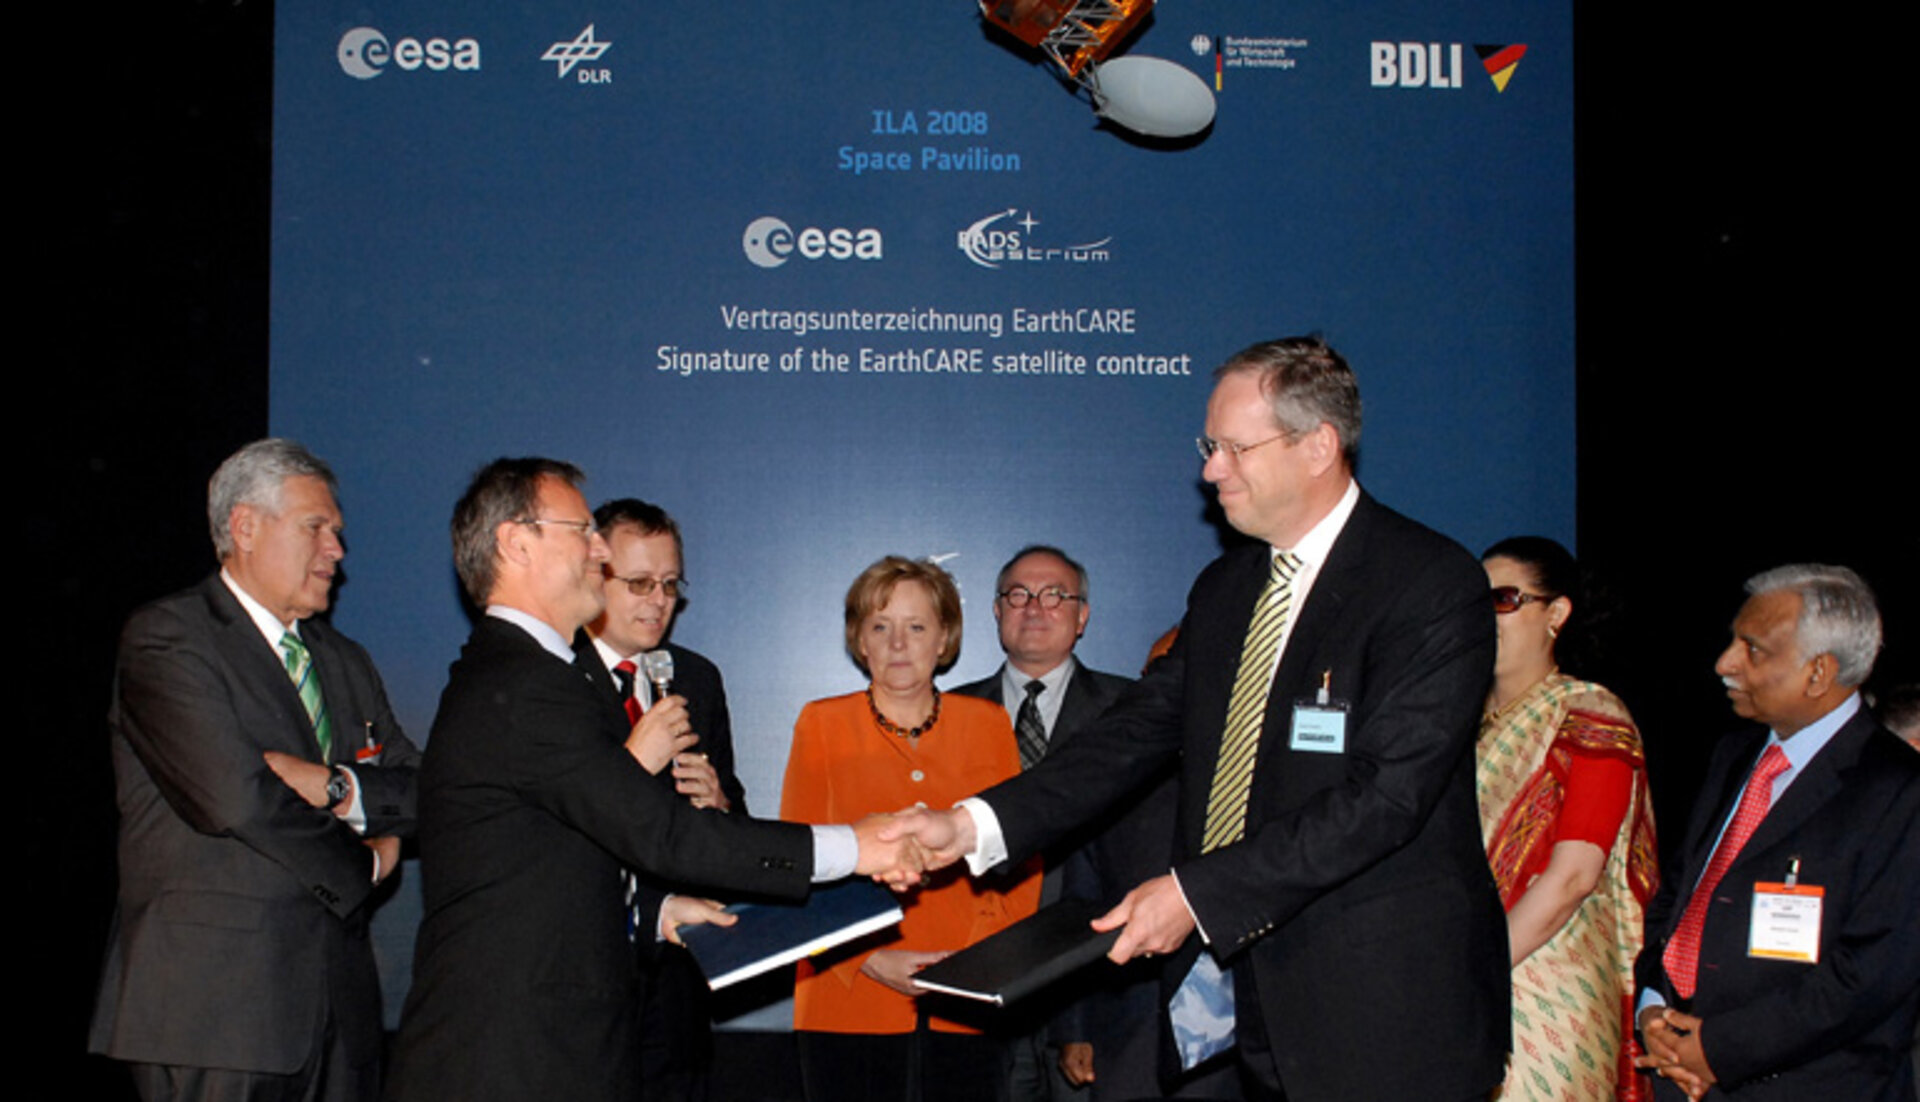 Signature of the EarthCARE contract